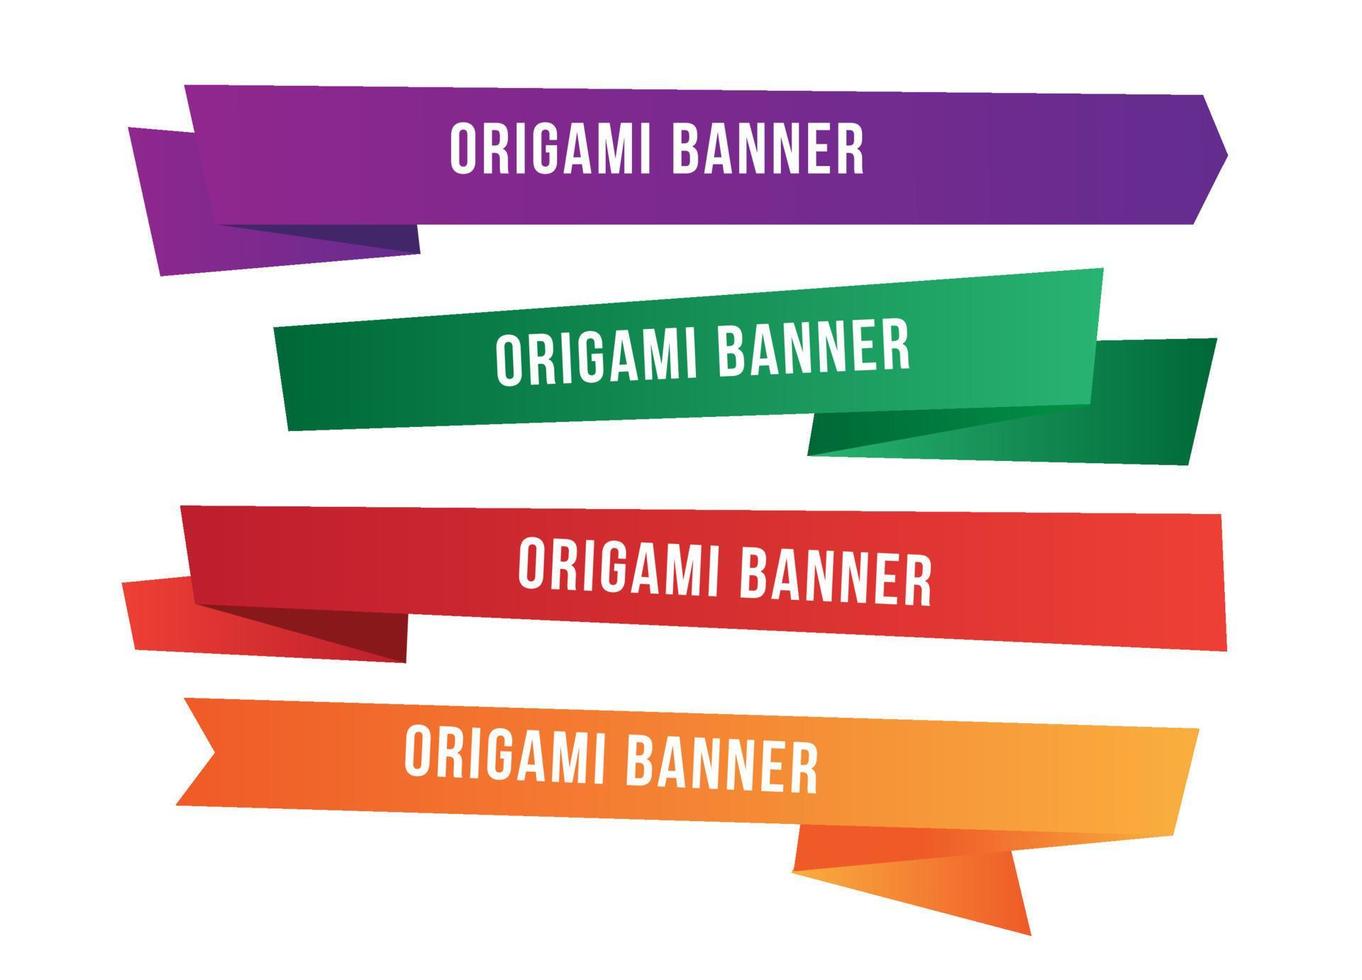 Origami banners in ribbon style vector design